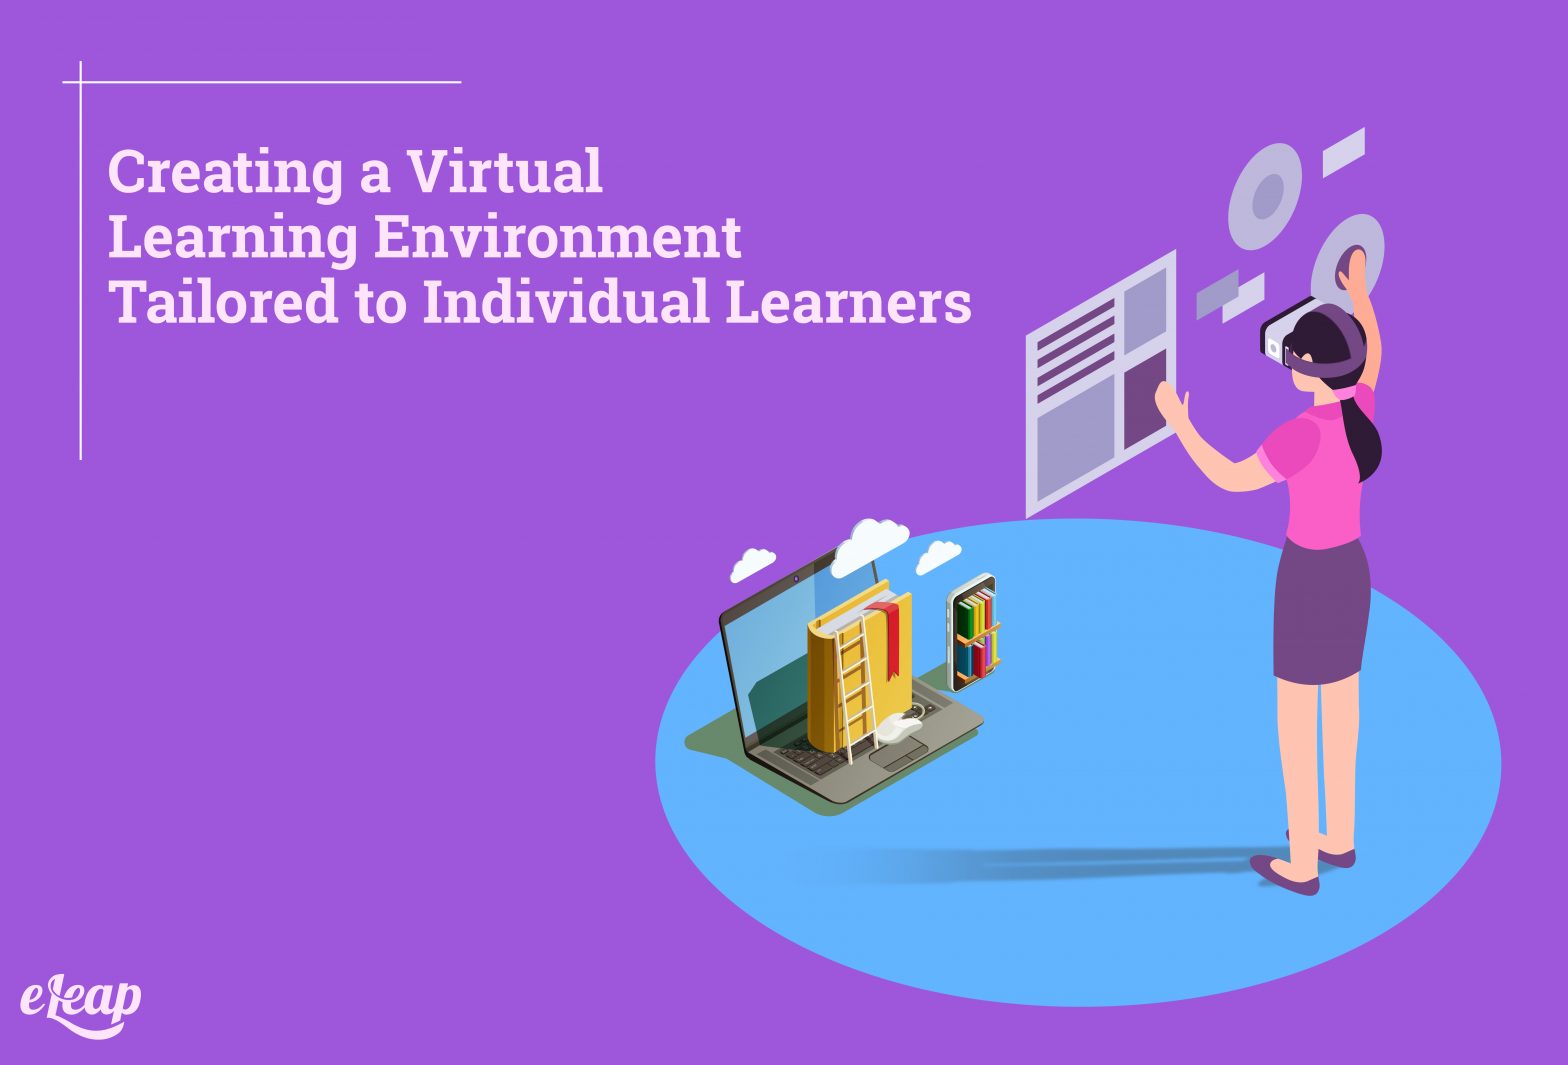 Creating a Virtual Learning Environment Tailored to Individual Learners